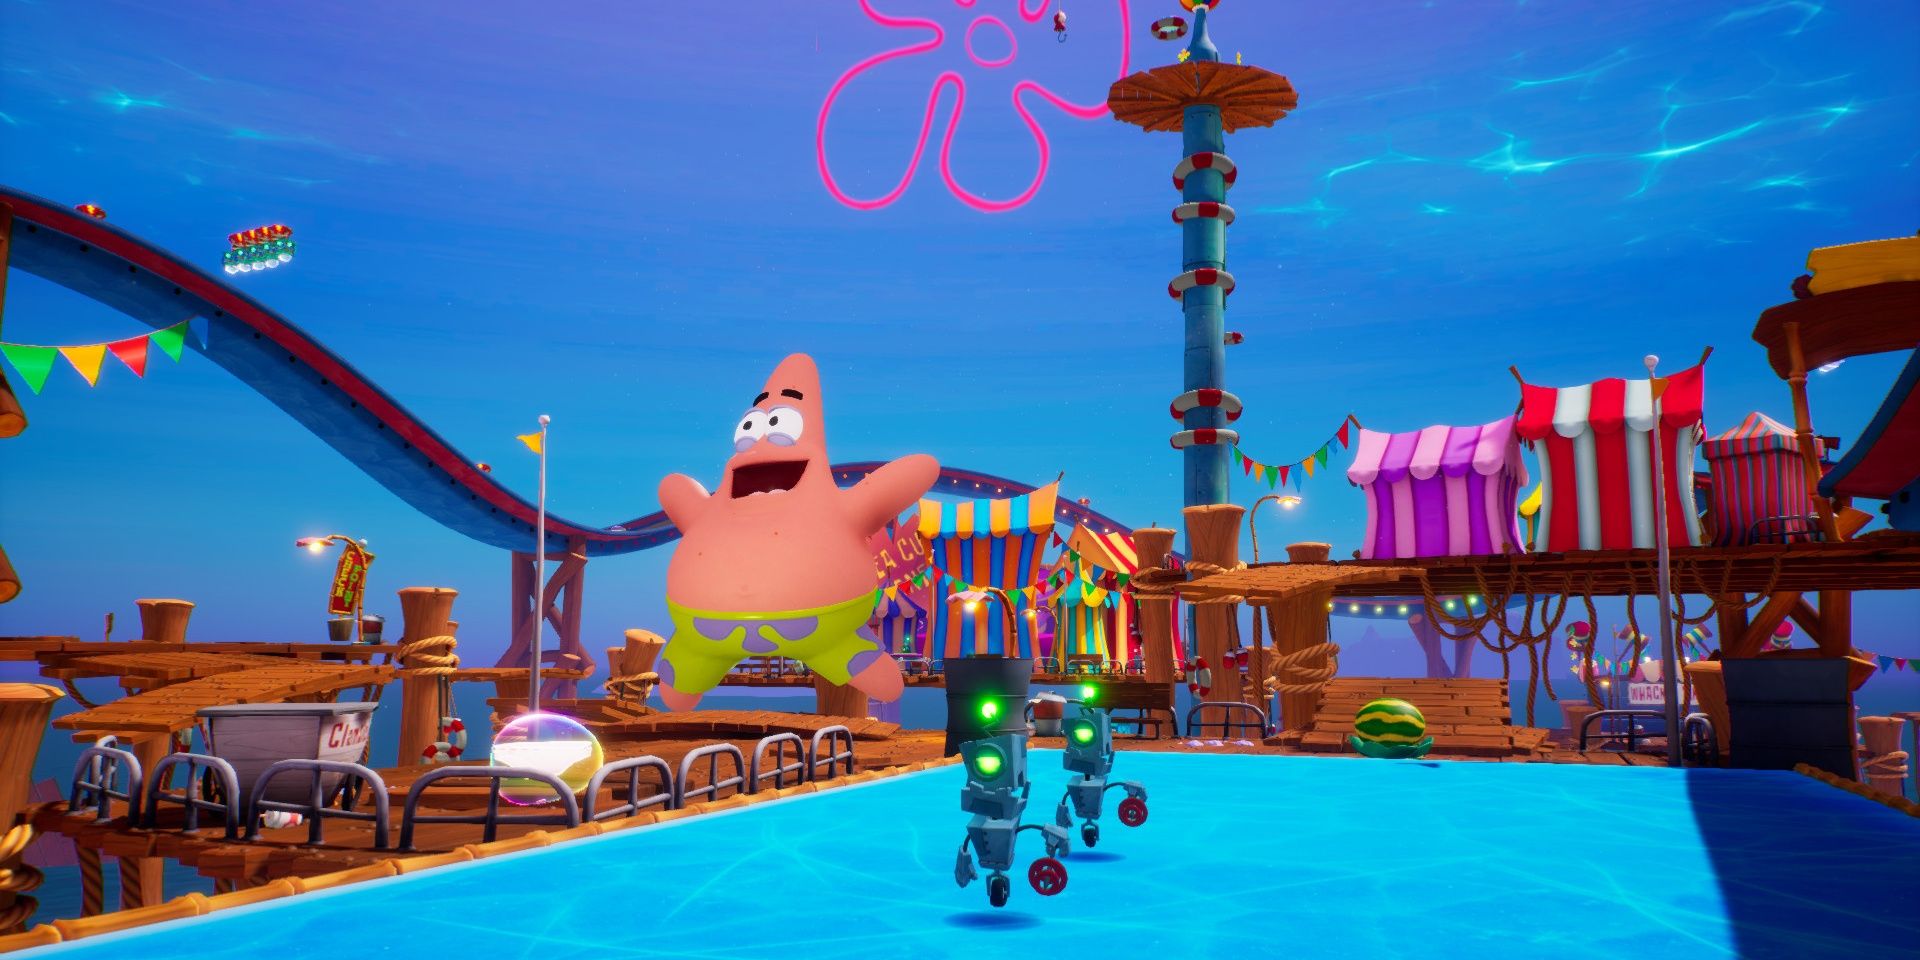 A screenshot showing Patrick being chased by two robots in SpongeBob SquarePants: Battle for Bikini Bottom - Rehydrated